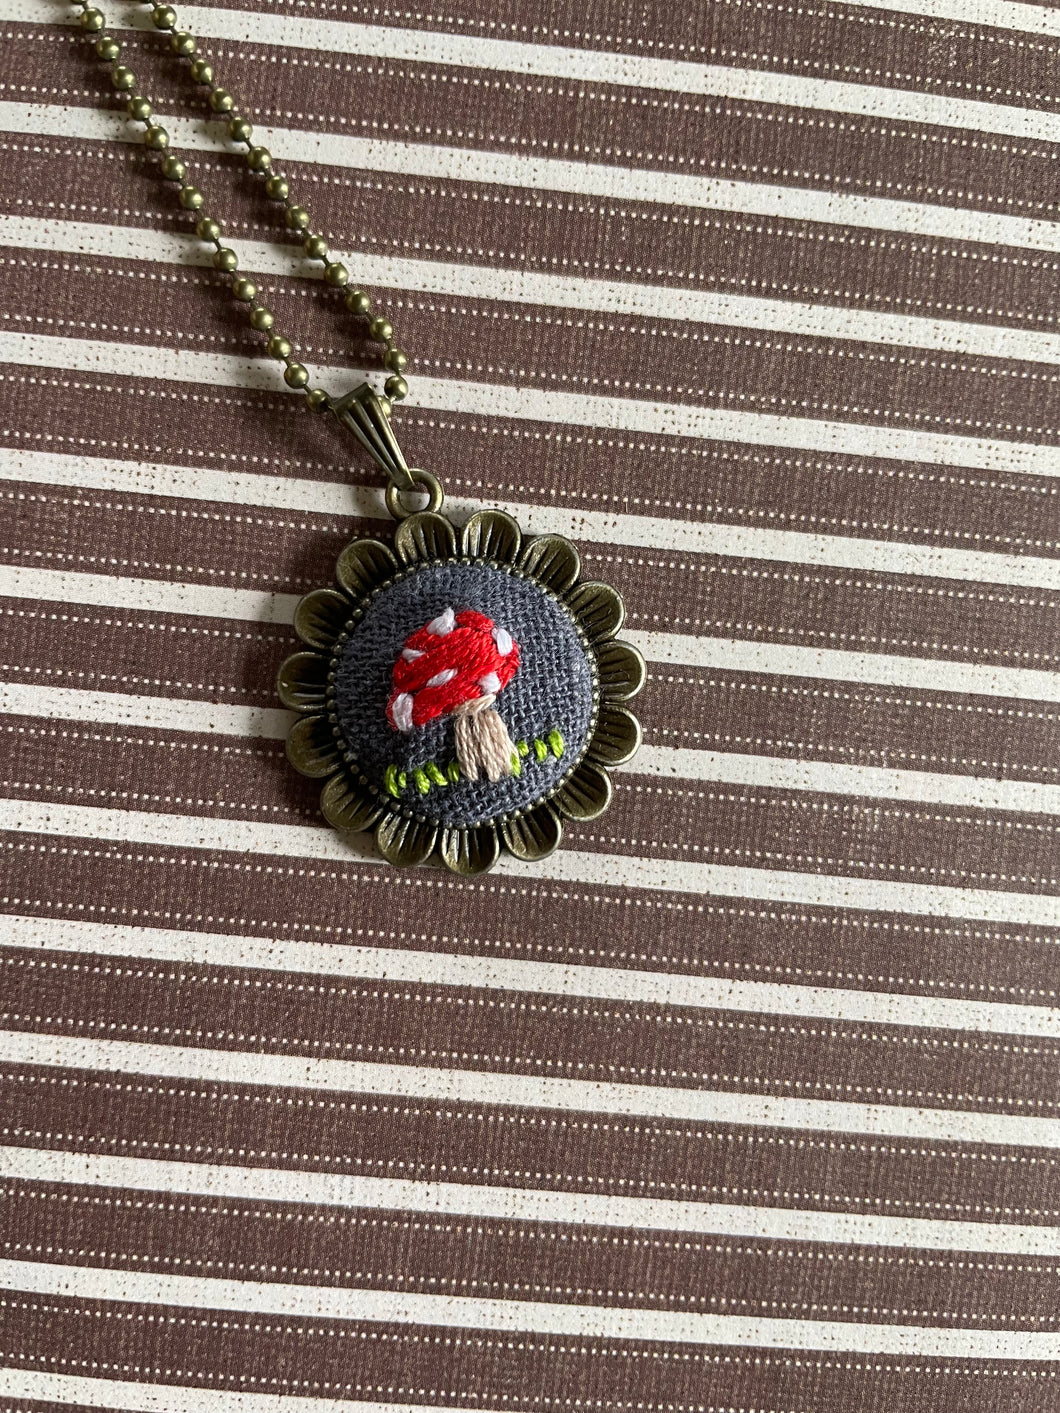 Hand Embroidered Mushroom on Linen Necklace